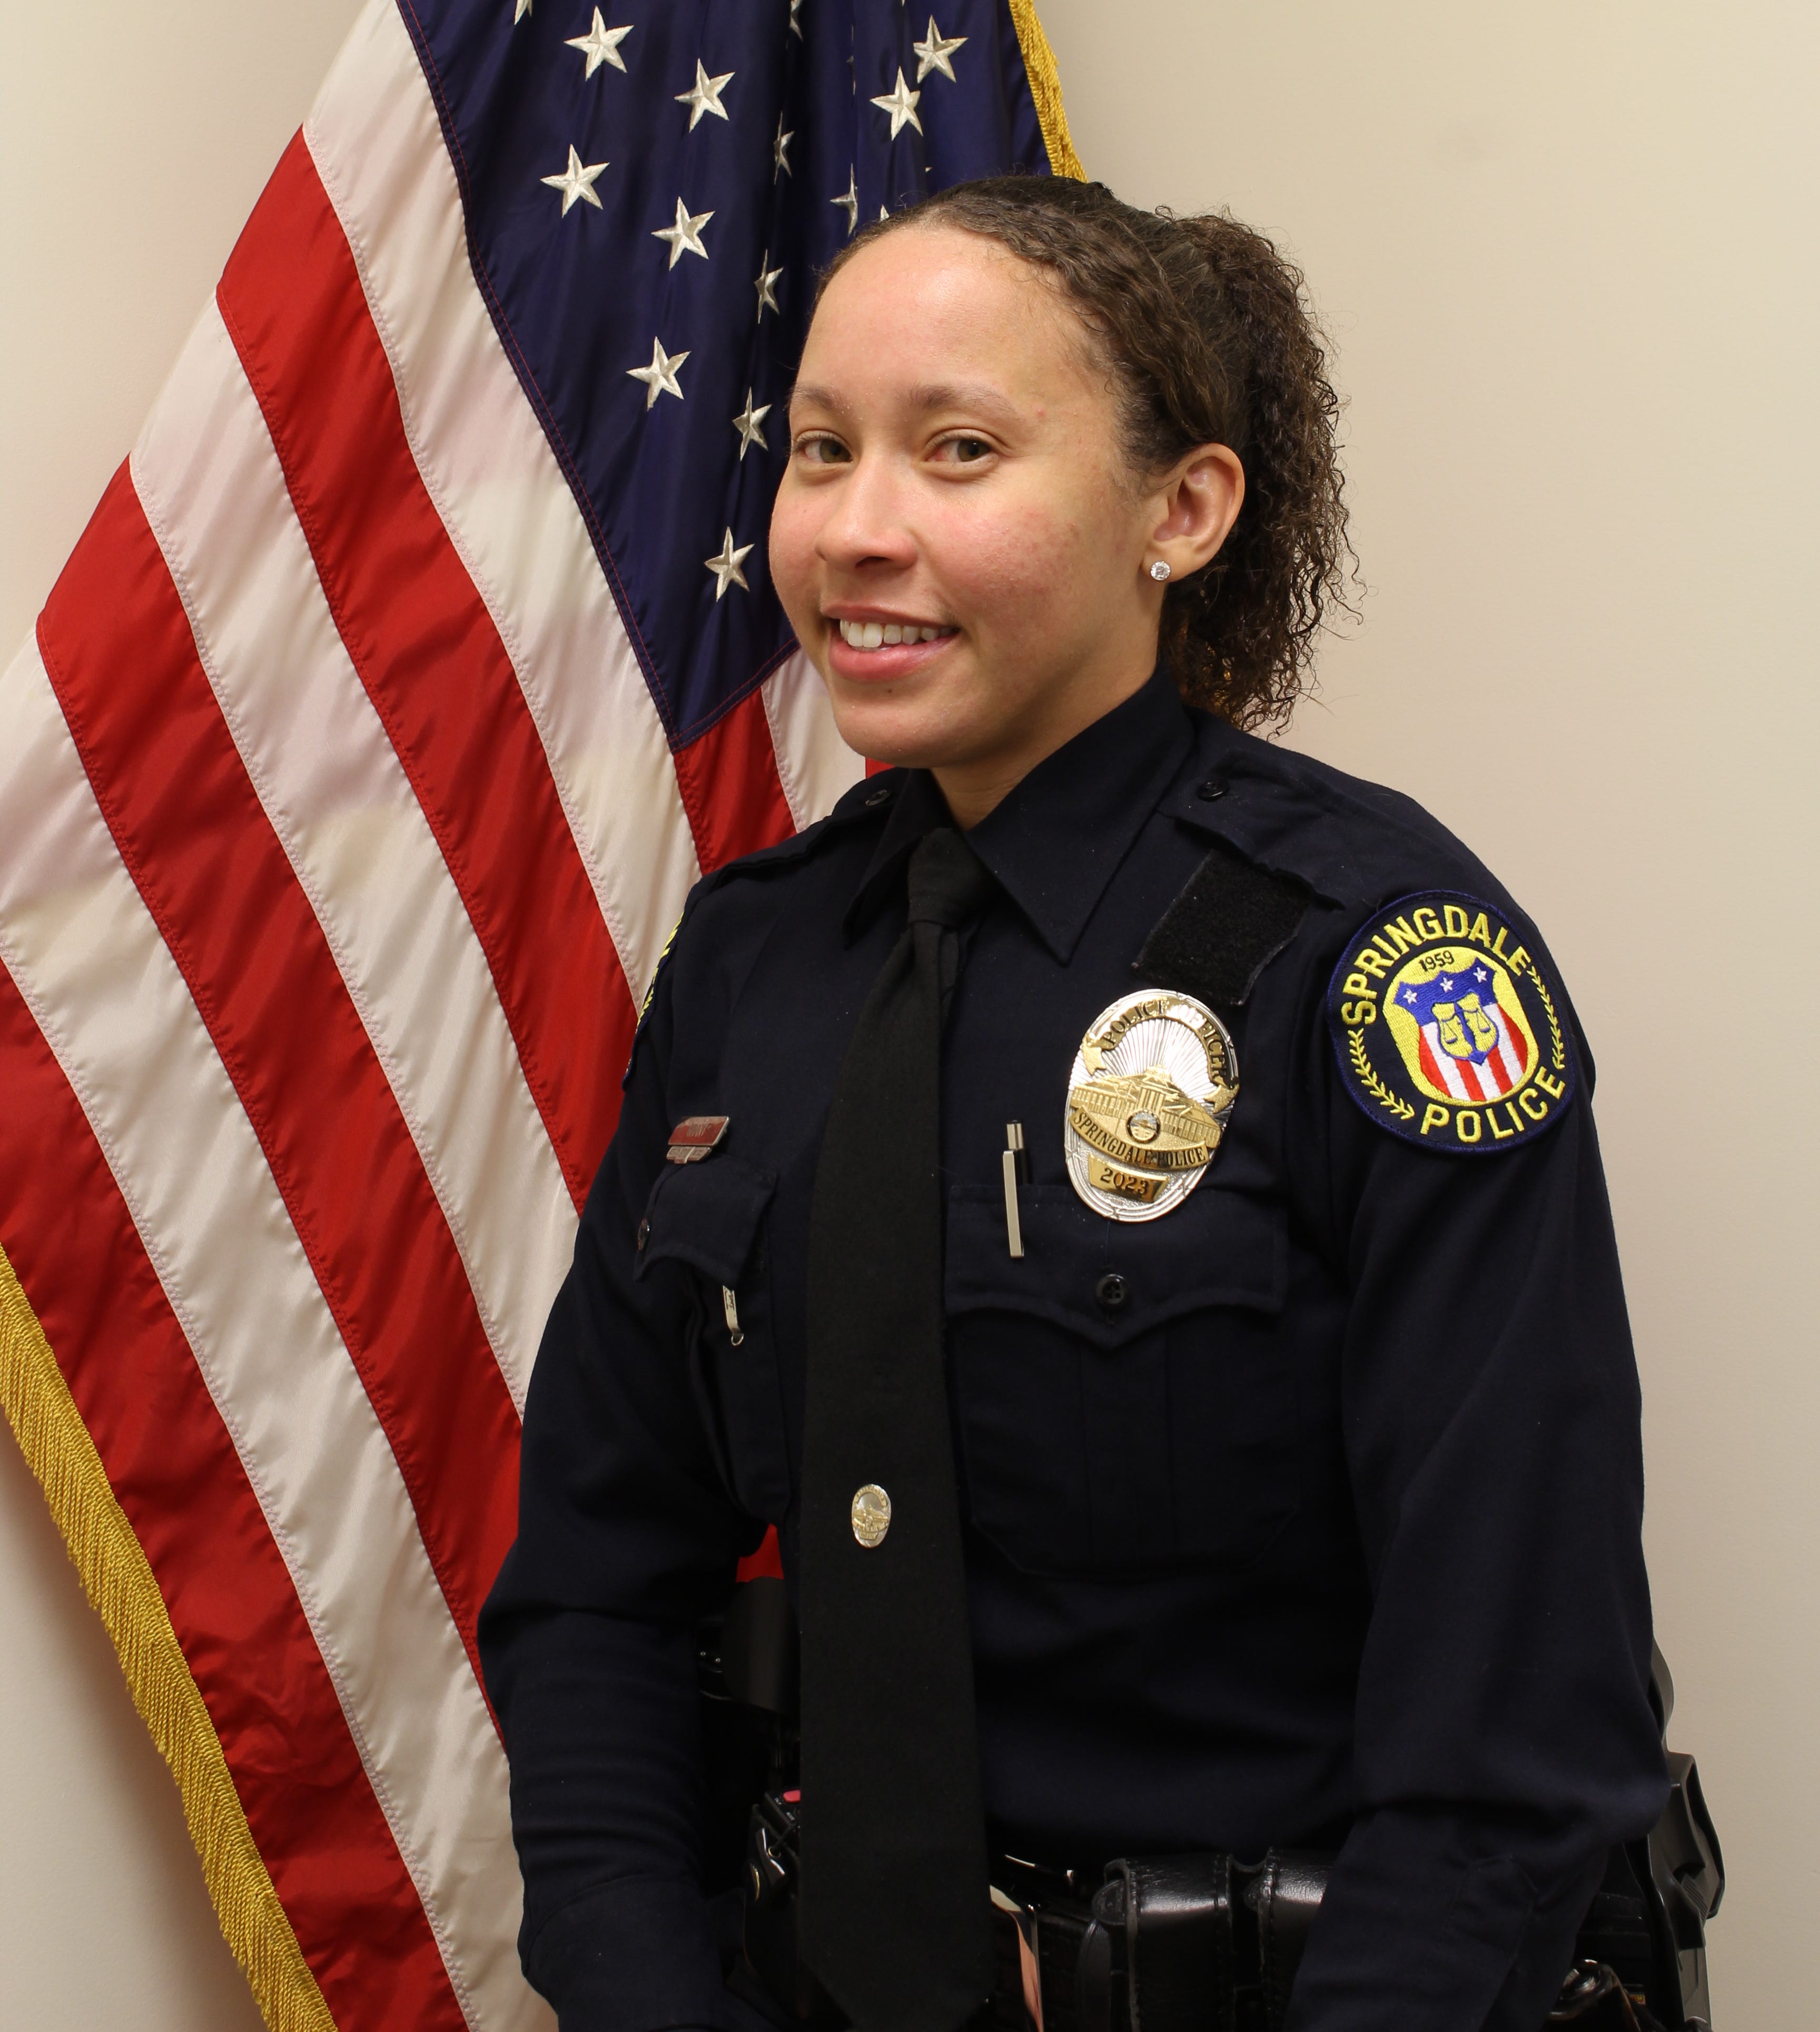 Springdale police officer Kaia Grant, 33, was killed in the line of duty March 21, 2020 as she set up a barricade on Interstate 275. Terry Blankenship was fleeing police and he purposely ran into her, killing her at the scene. He was convicted of murder and is serving life in prison.